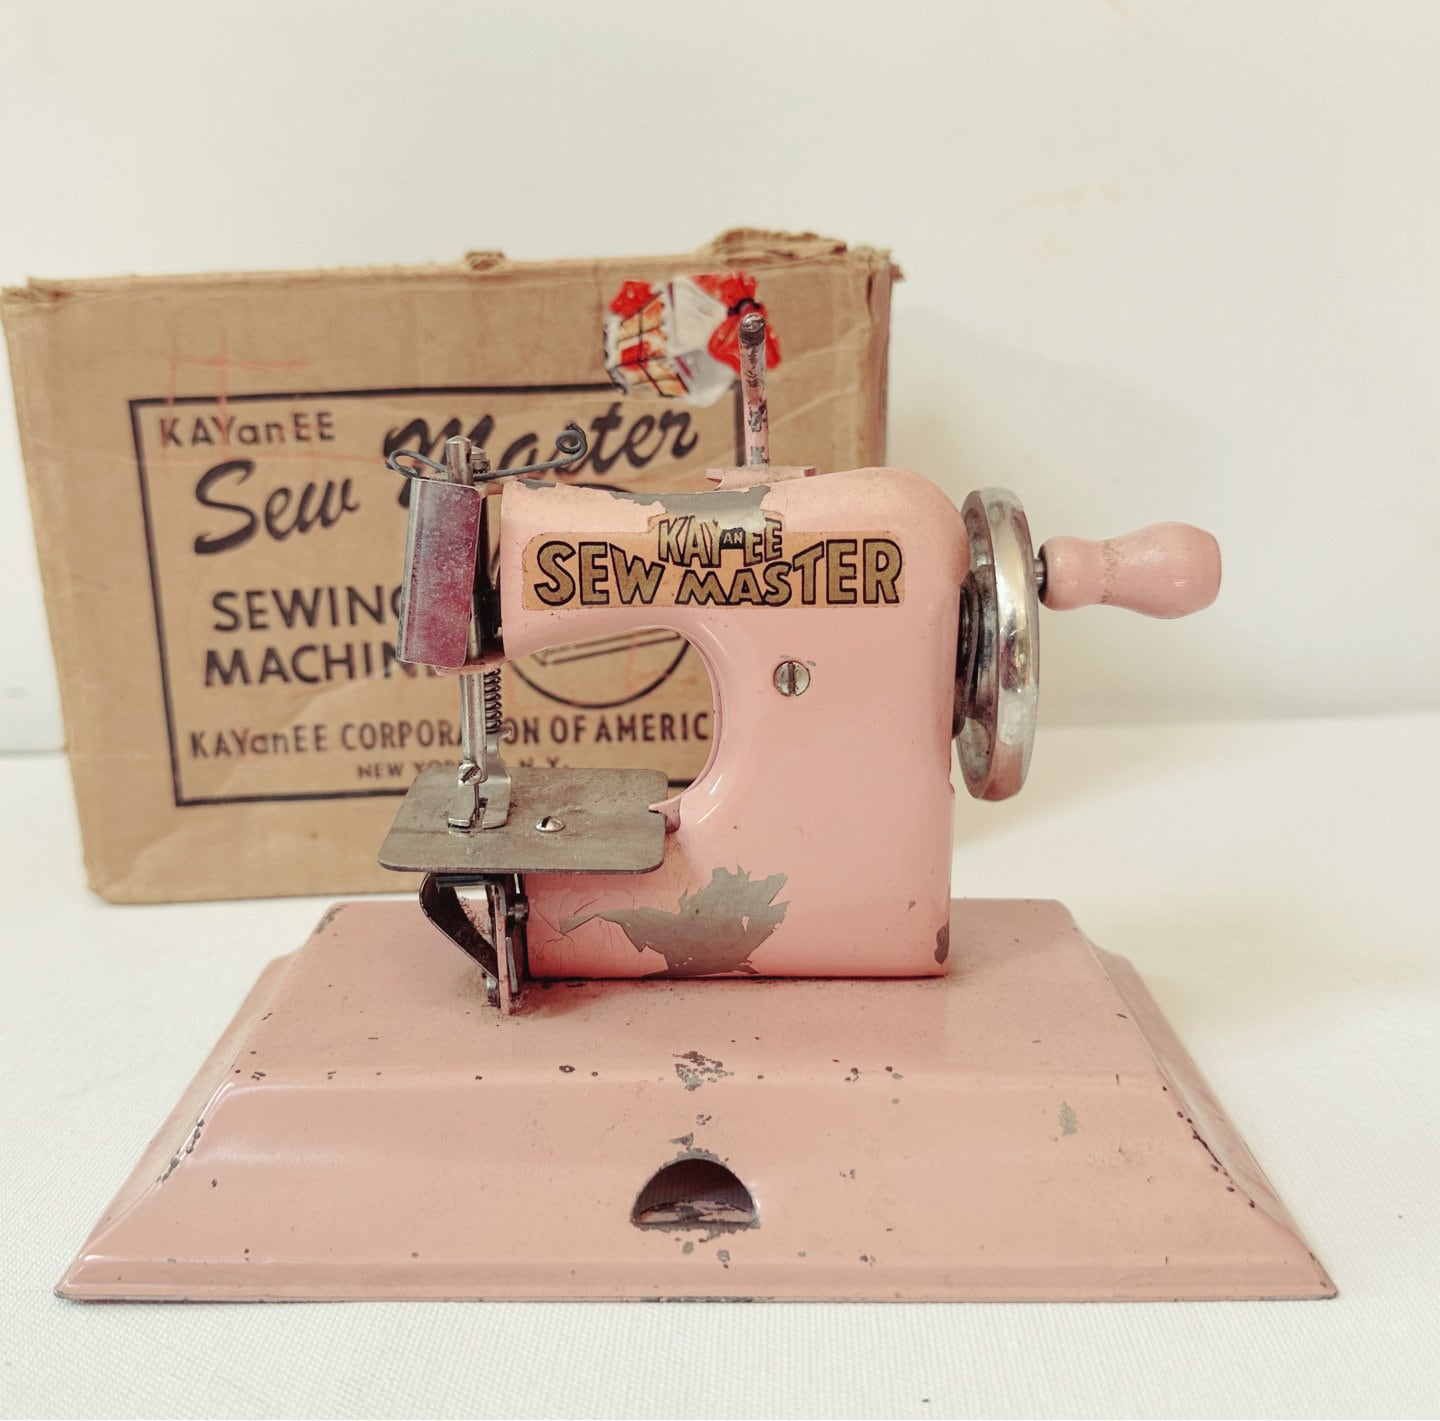 Vintage 1950s Pink Toy Sewing Machine in Original Box Just the